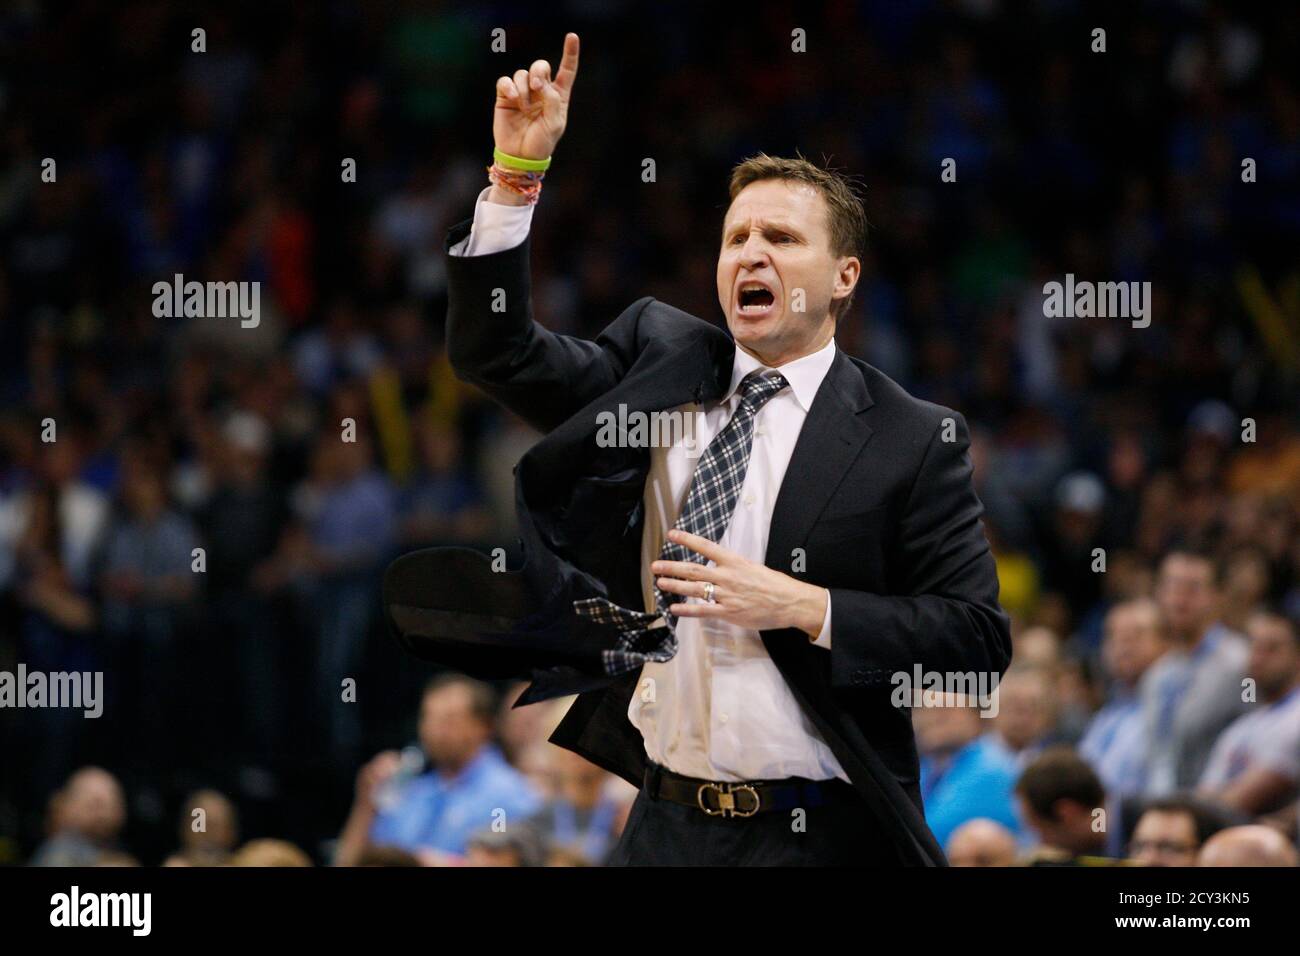 Oklahoma City Thunder head coach Scott Brooks instructs his team against  the San Antonio Spurs in the second half of their NBA basketball game in  Oklahoma City, Oklahoma April 4, 2013. REUTERS/Bill